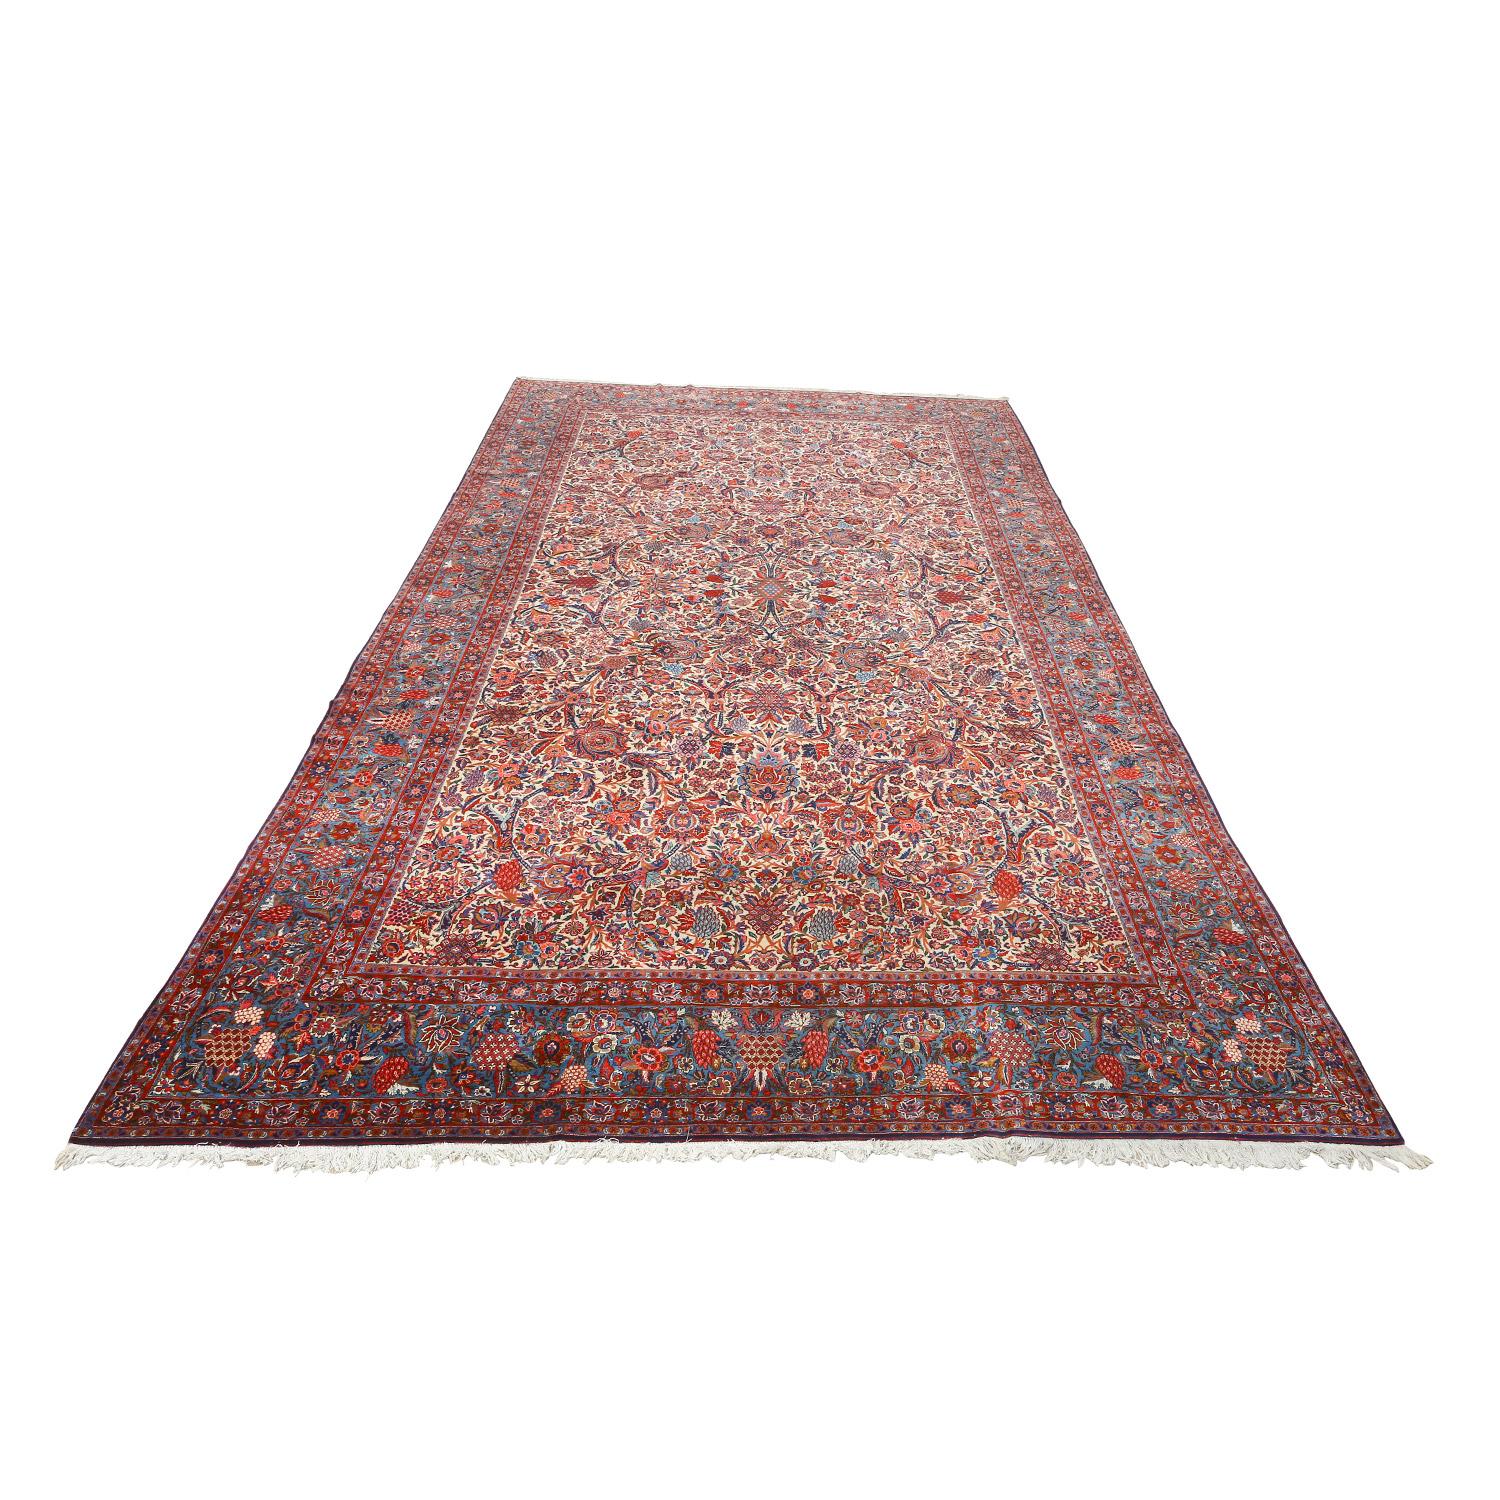 This Antique Ghazvin Rug, masterfully woven by the skilled hands of Etemad, is an extraordinary piece of Persian craftsmanship. With its grand dimensions of 18 feet by 10 feet, it commands attention and admiration, making it a striking centerpiece